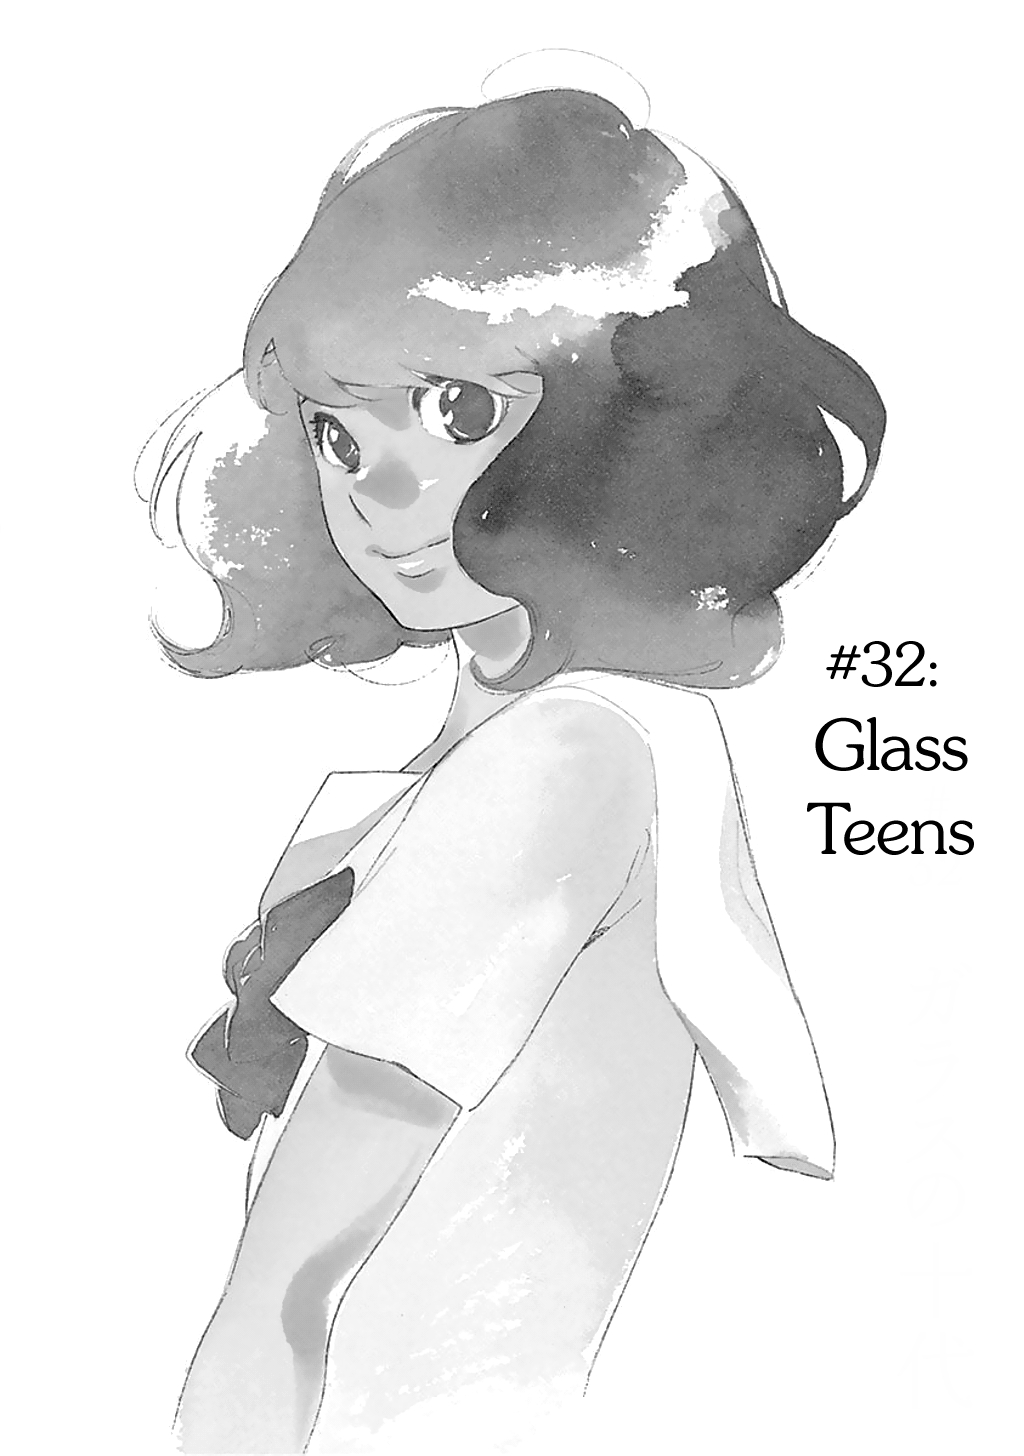 Musume no Iede Vol. 6 Ch. 32 Glass Teens